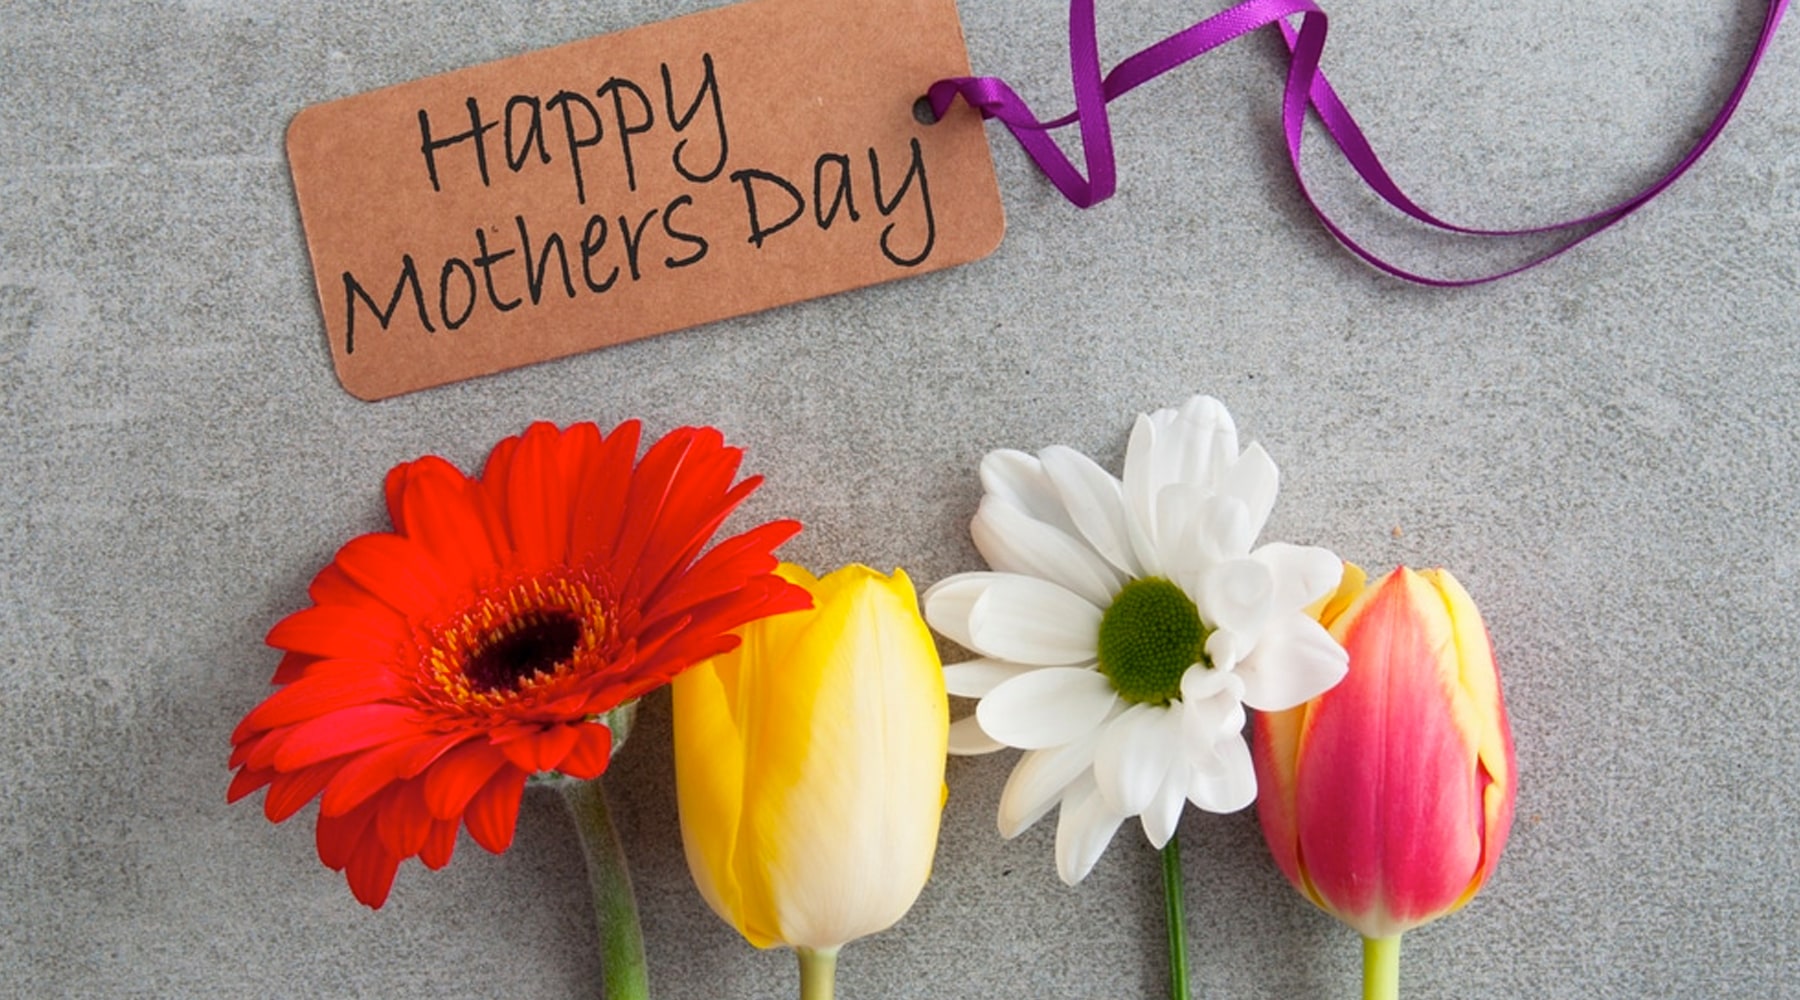 A Gift Guide to Show Your Love on Mother’s Day 2021